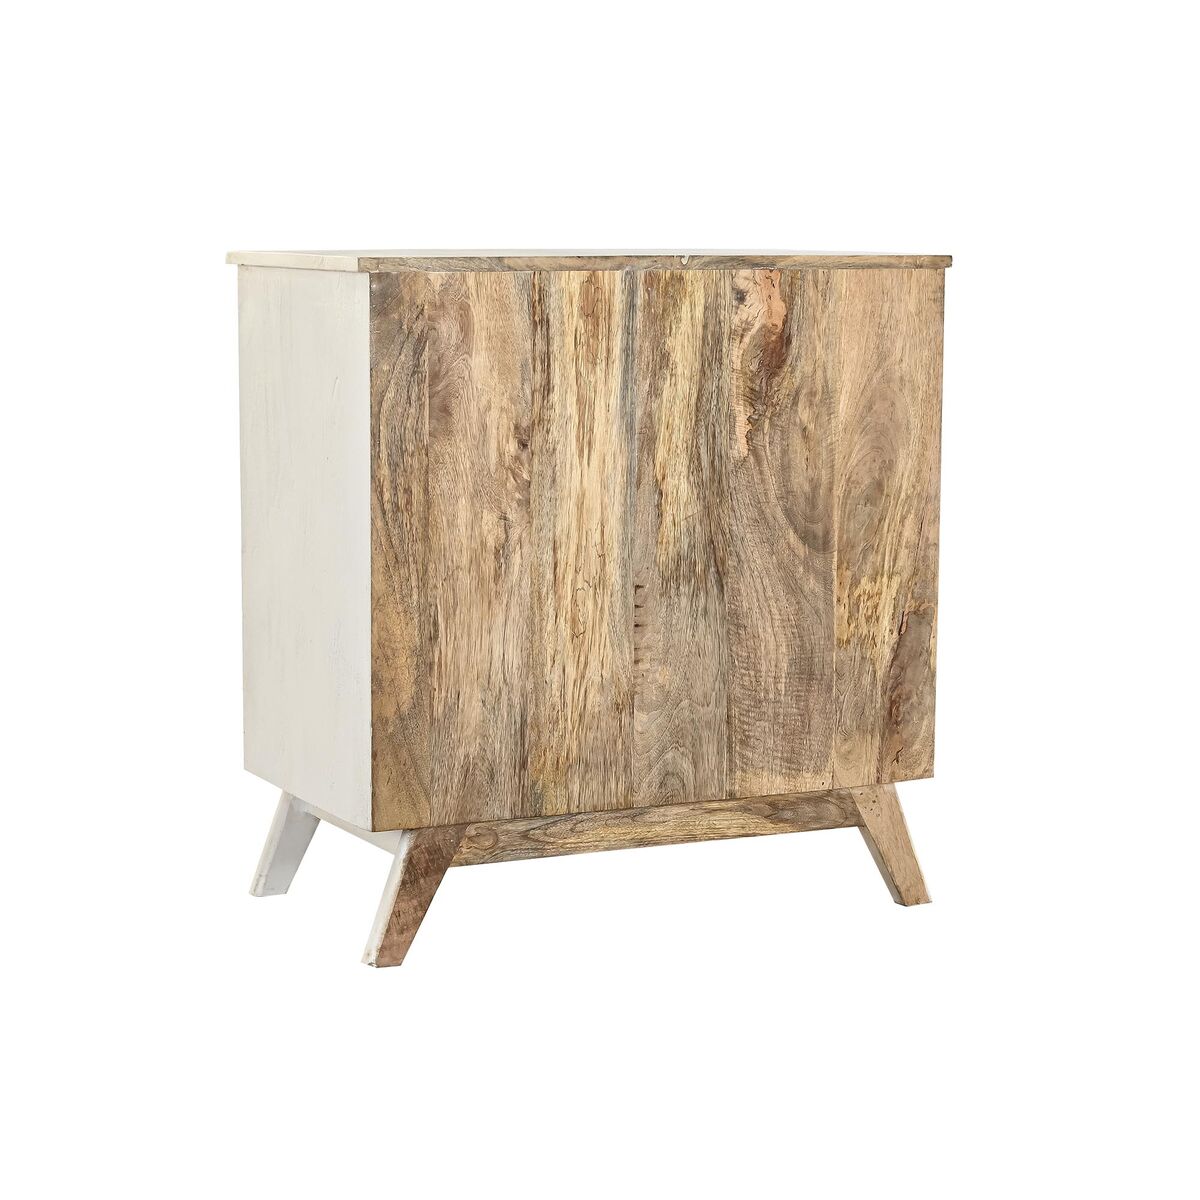 Chest of drawers DKD Home Decor Metal White Colonial Dark brown Mango wood (72 x 50 x 75 cm)